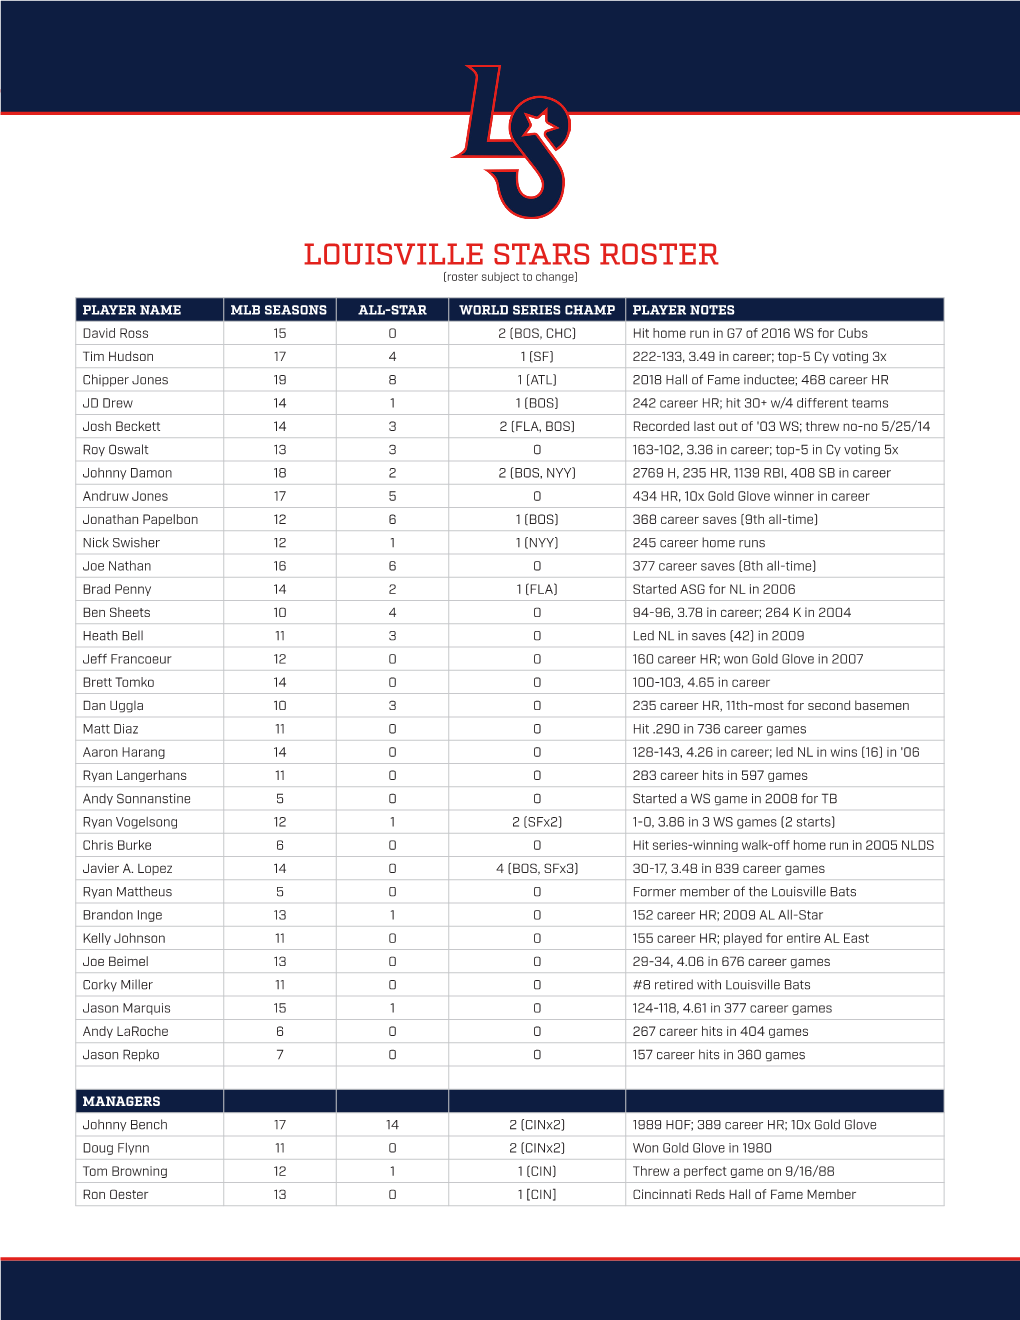 LOUISVILLE STARS ROSTER (Roster Subject to Change)